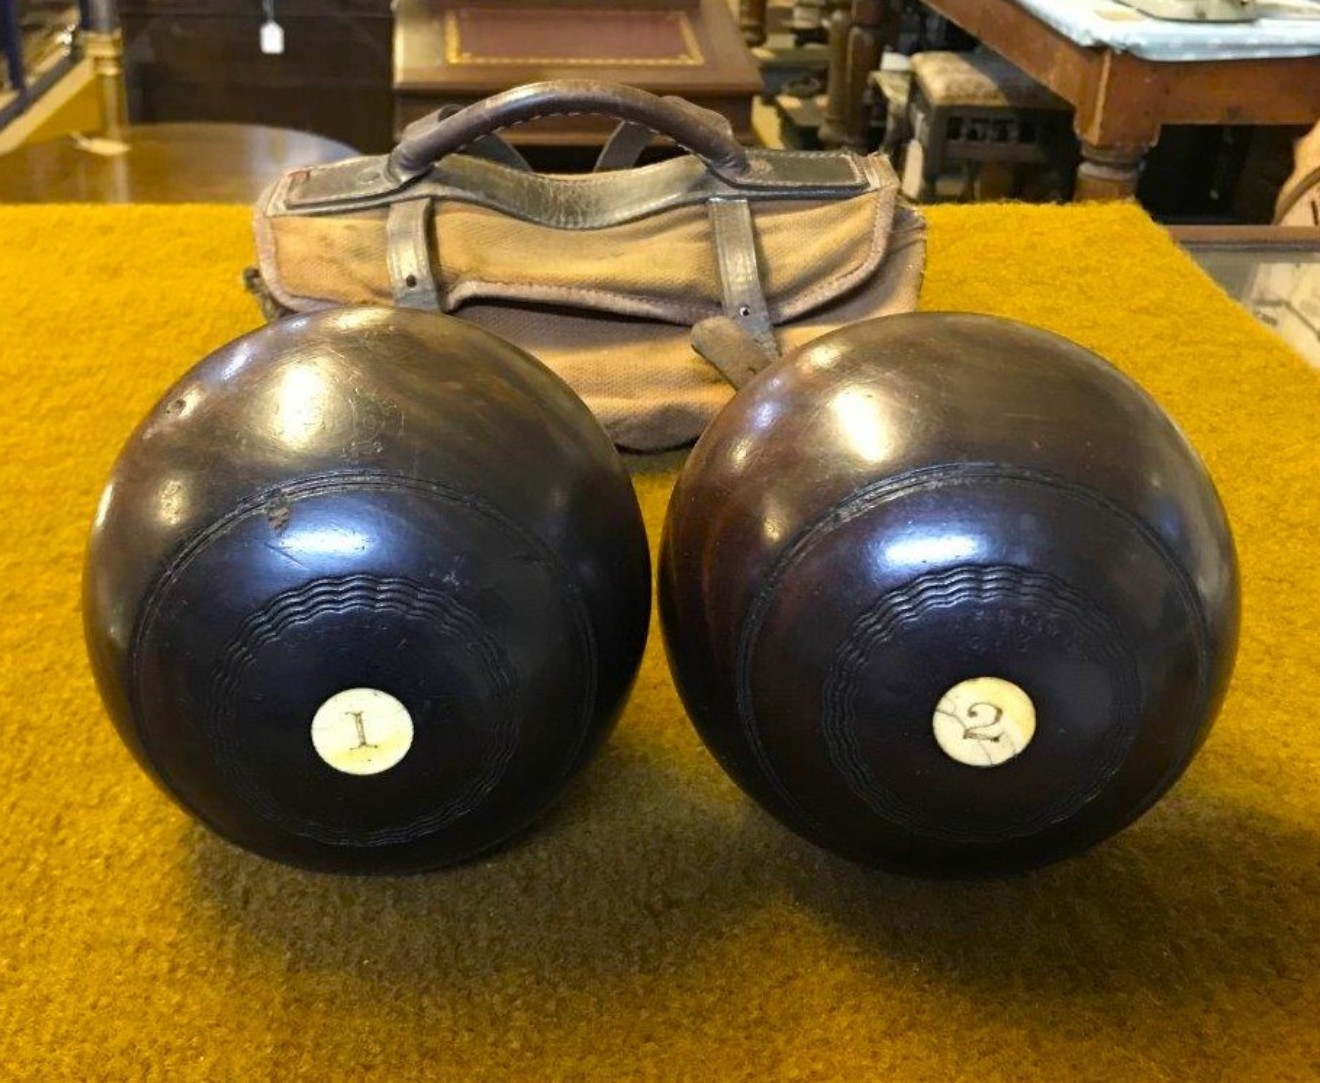 Antique Pair of Lawn Bowls Size 3 Nos 1 & 2 Marked "M" on Bone Inserts